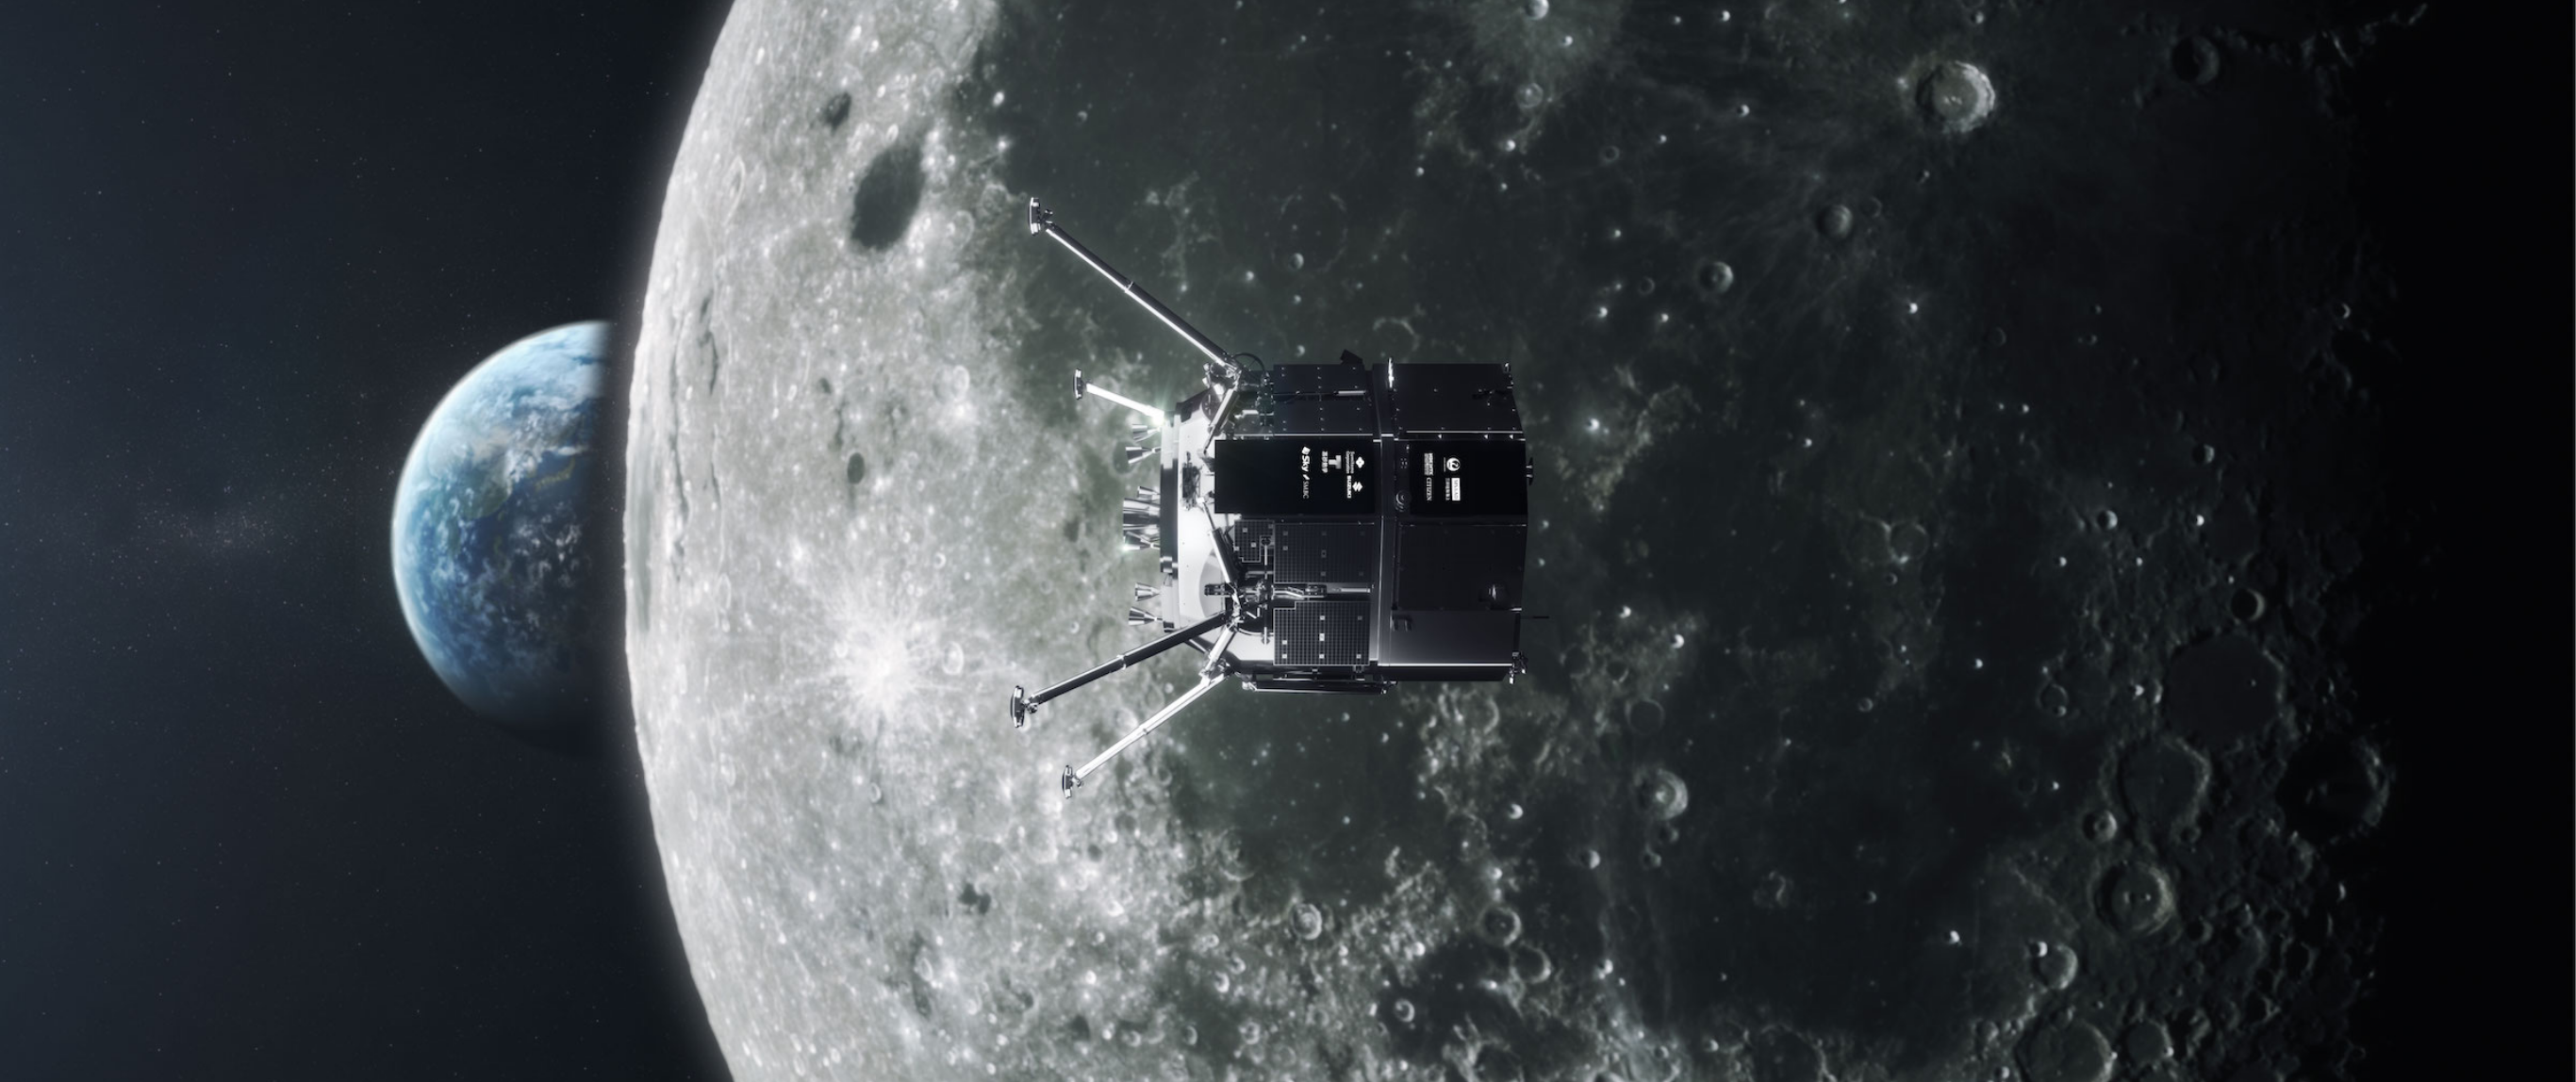 A small commercial lunar lander used for delivering customer payloads to the Moon.